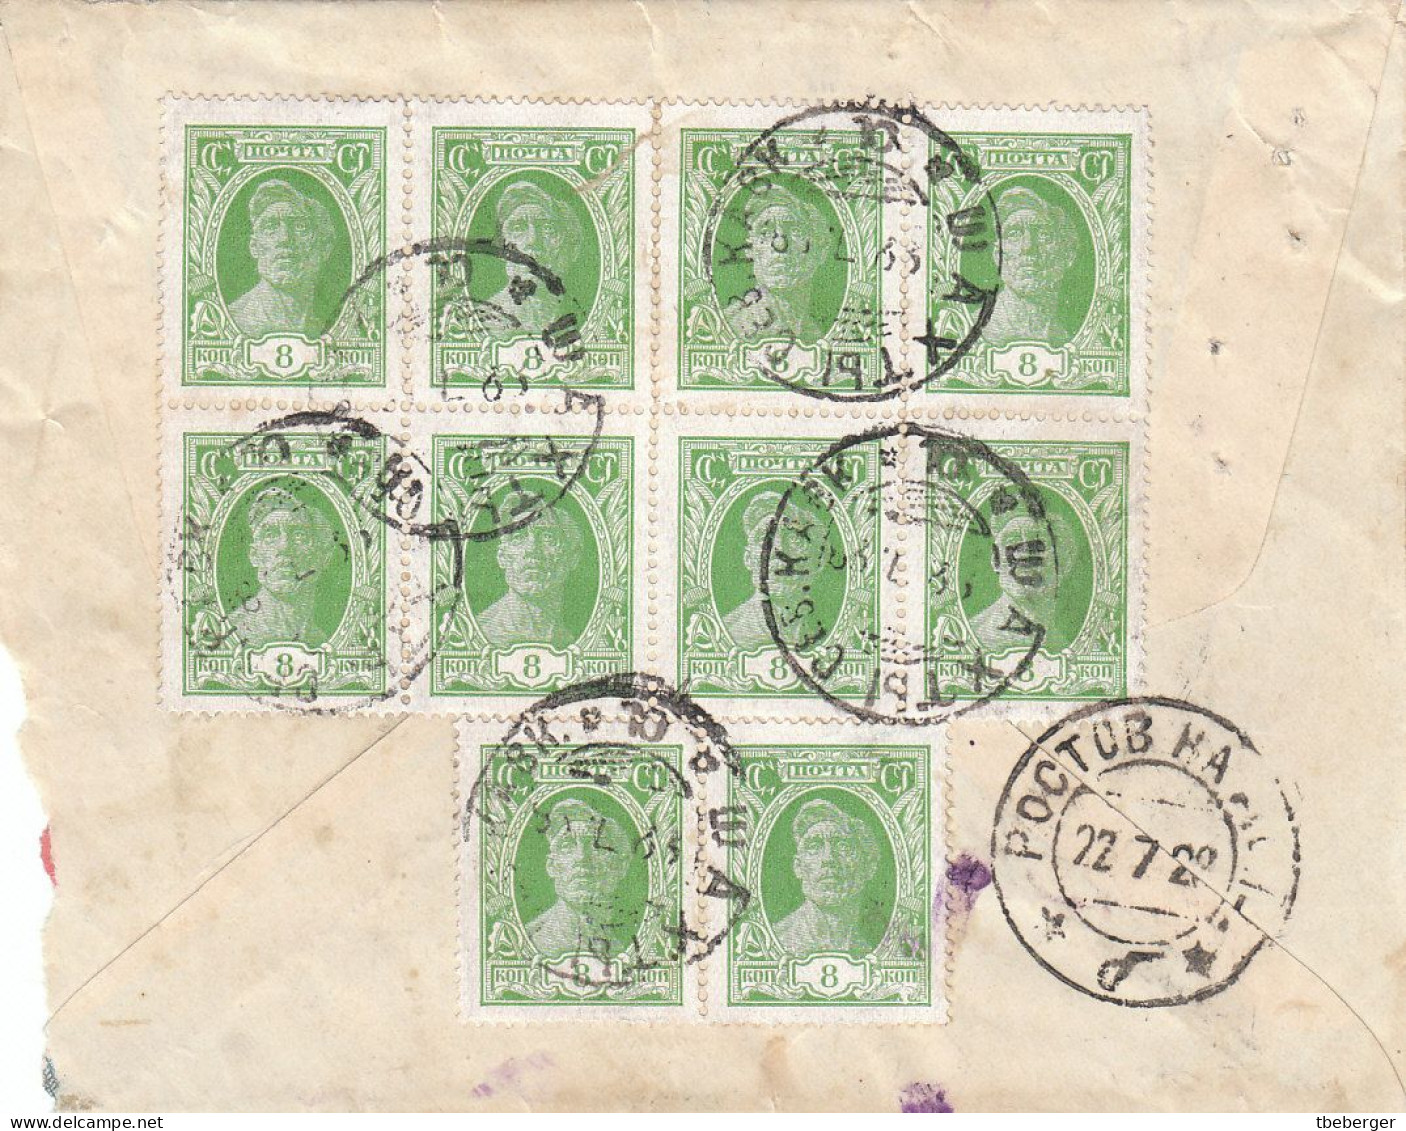 Russia USSR 1928 Special Post Express Mail SHAKHTY To ROSTOV, Ex Miskin (40) - Lettres & Documents